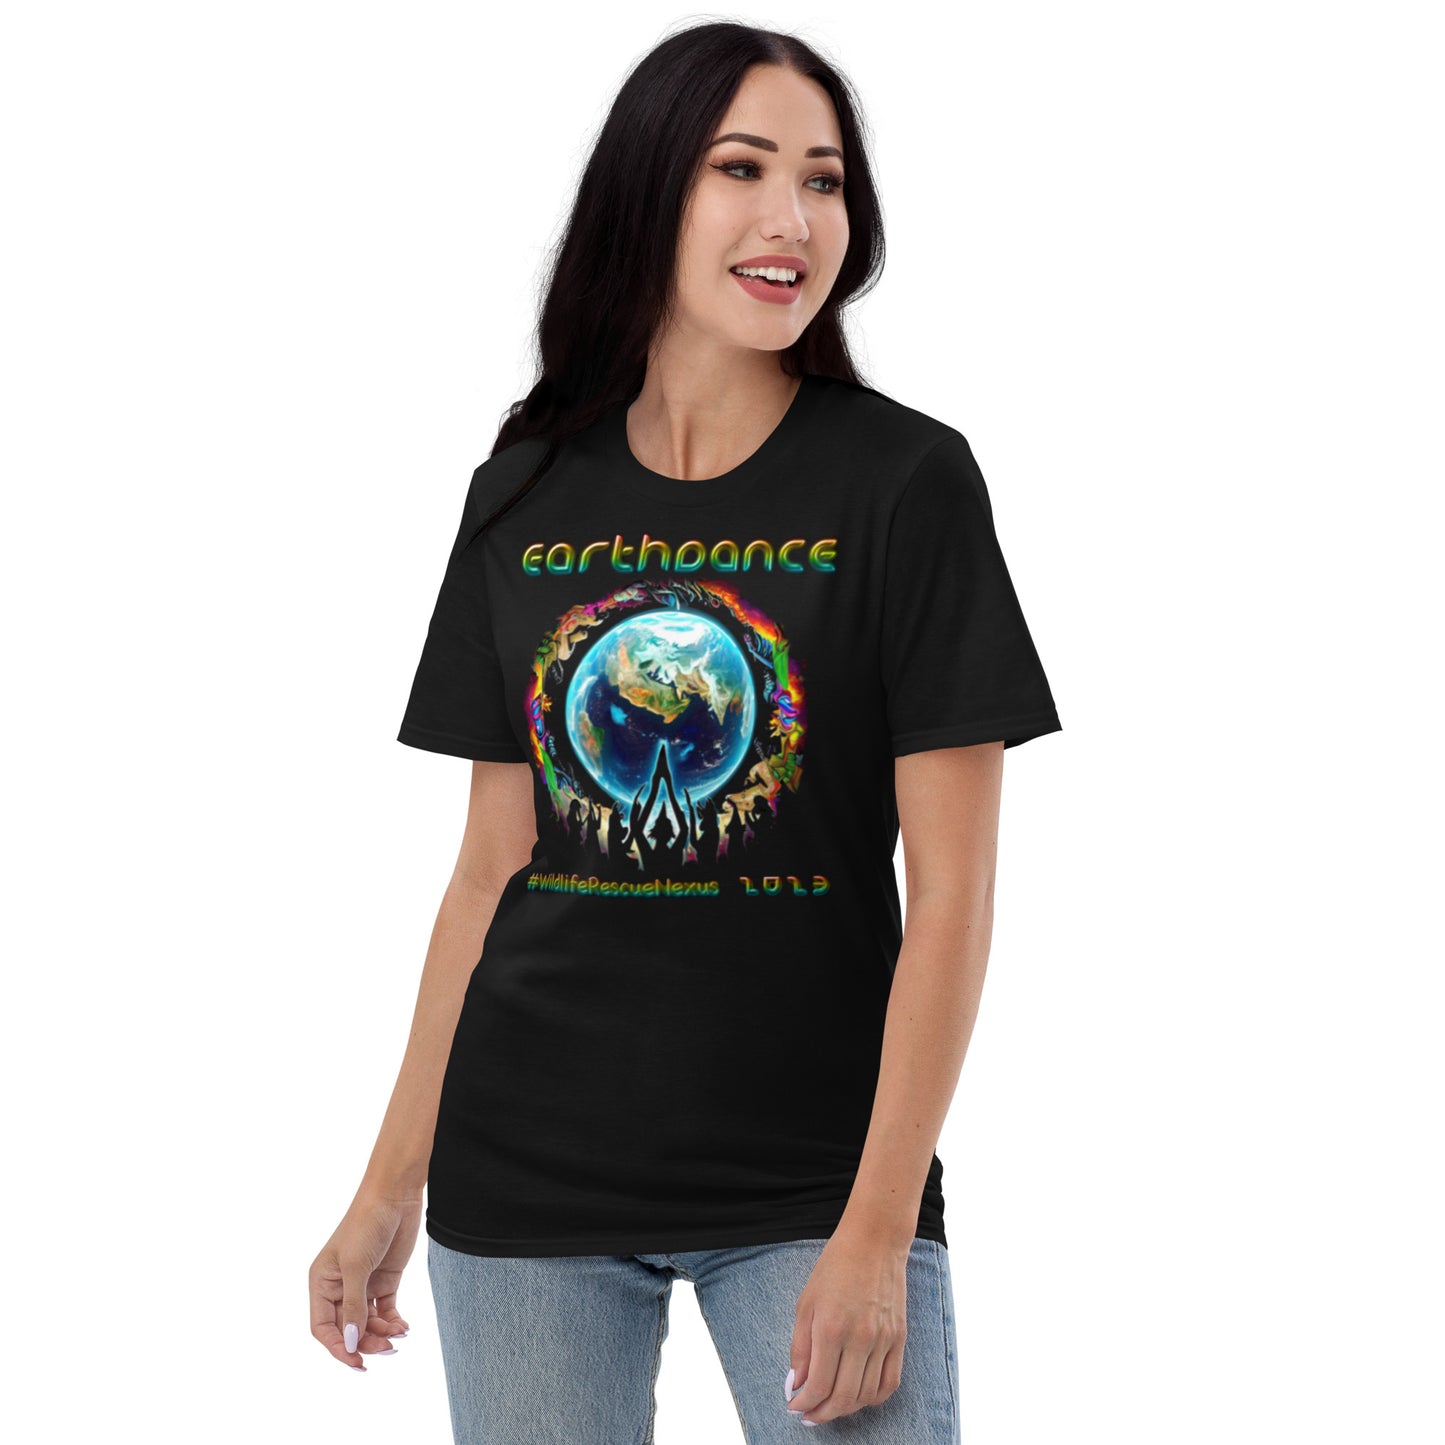 Earthdance 2023 - Heather Effie v1 - Limited Edition - Short-Sleeve T-Shirt - The Foundation of Families